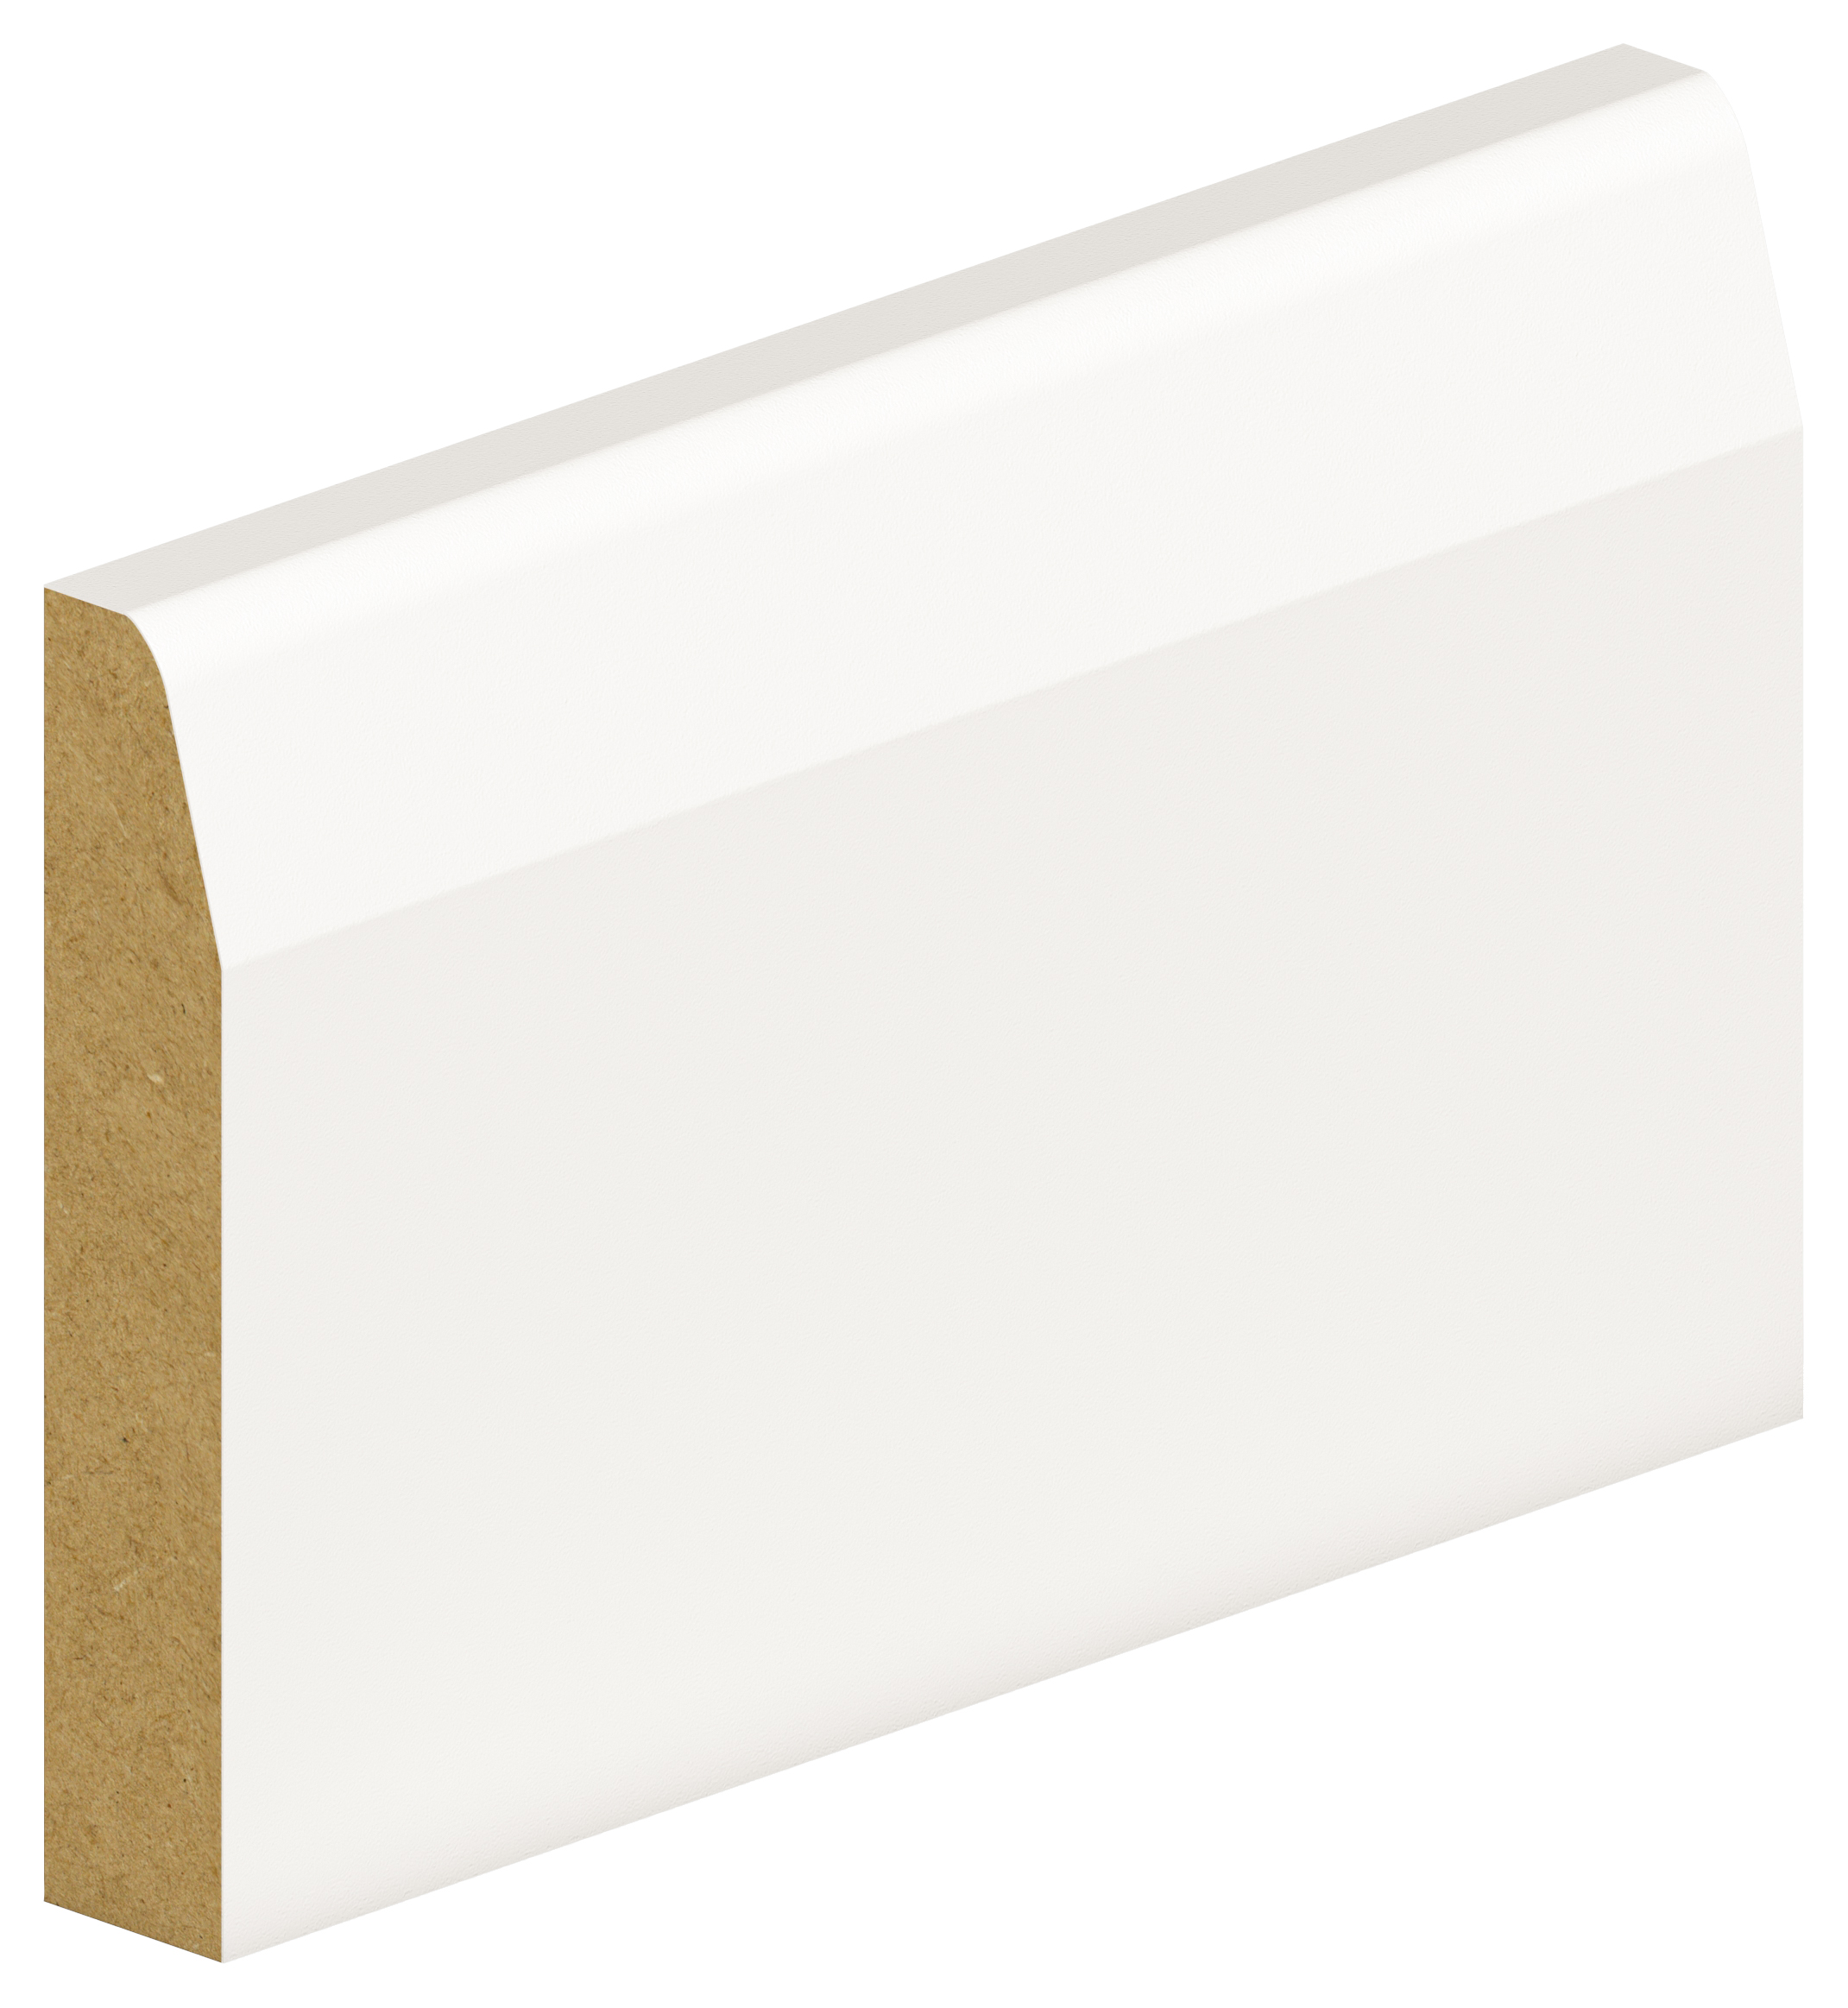 Wickes Chamfer and Round Primed MDF Architrave - 18 x 69 x 2200mm - Pack of 5